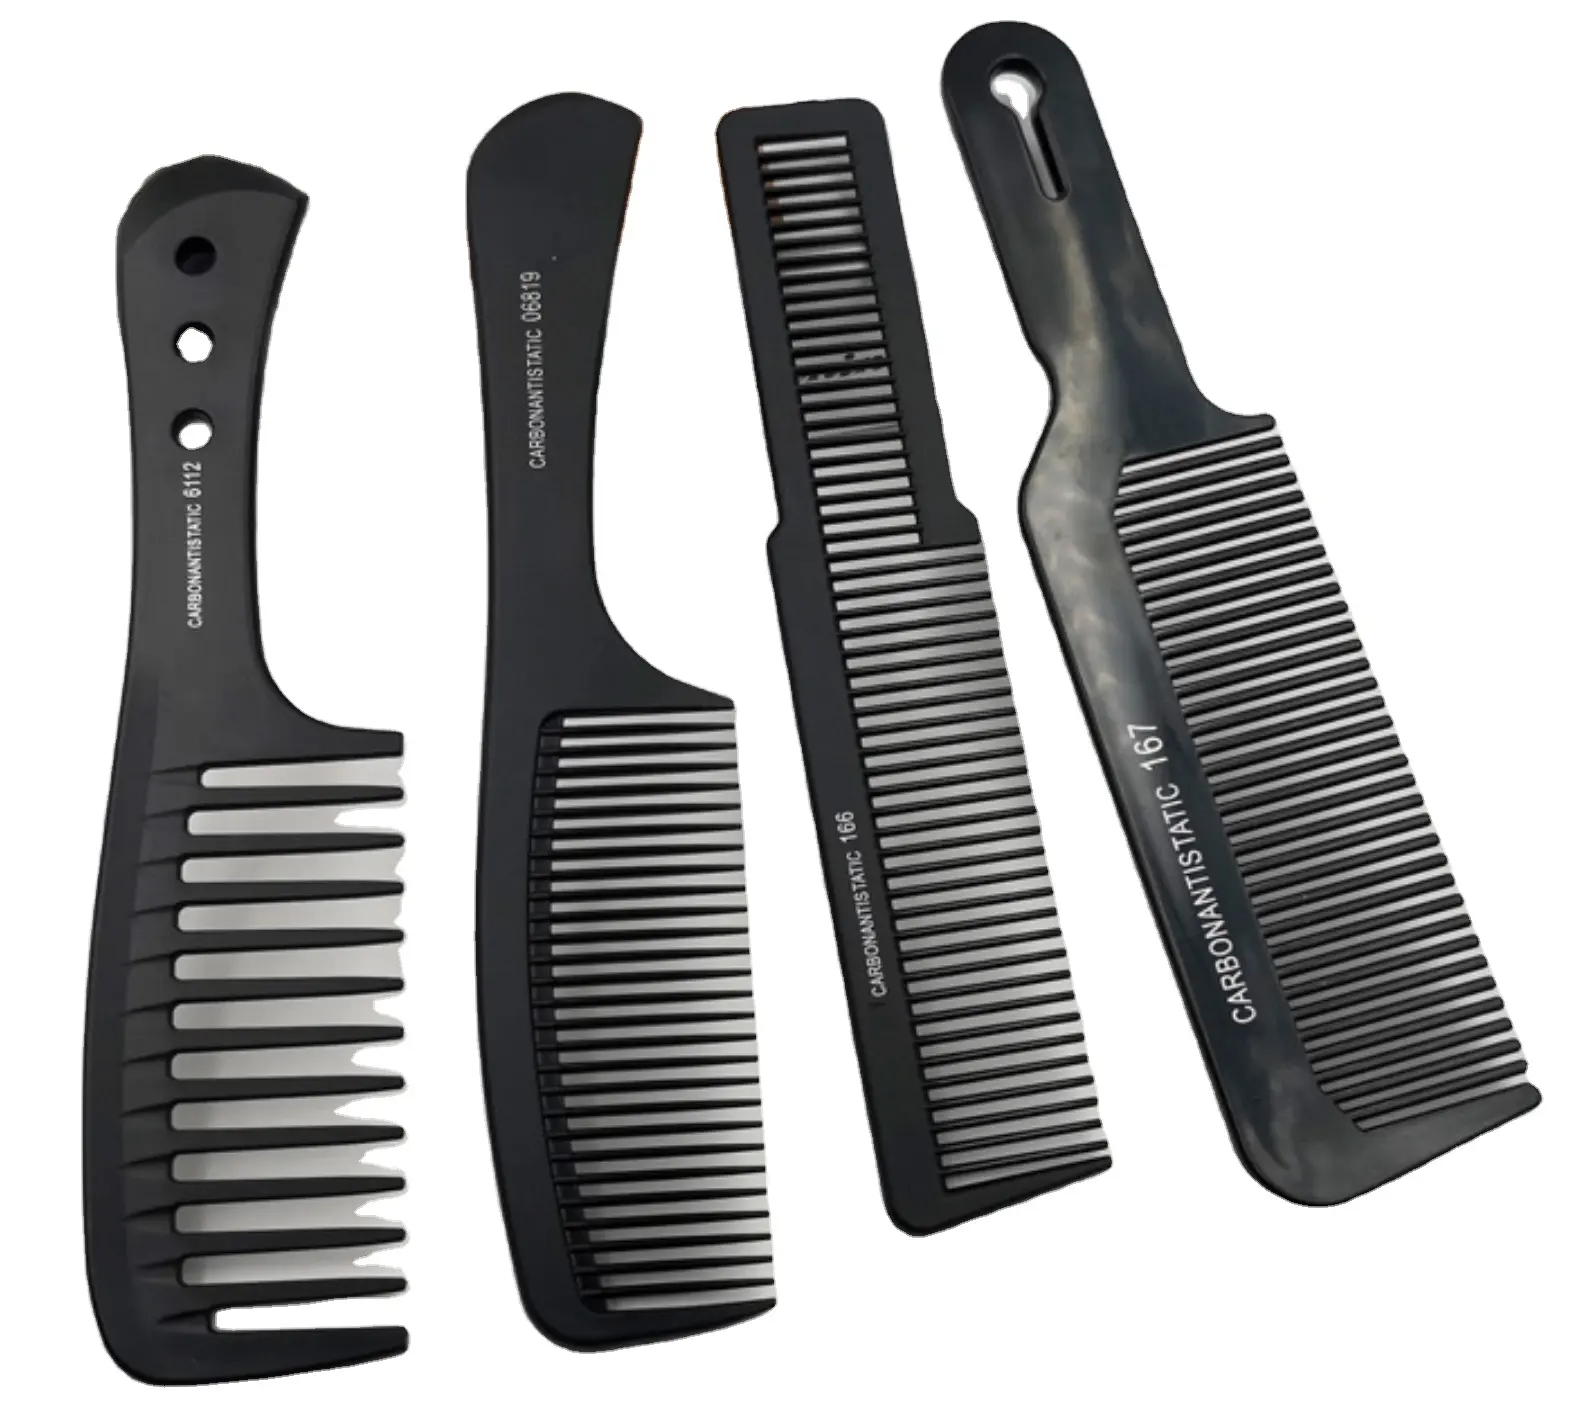 Comb Plastic Barber Comb Black Thickened Hair Cutting Comb Men's and Women's Styling Tools